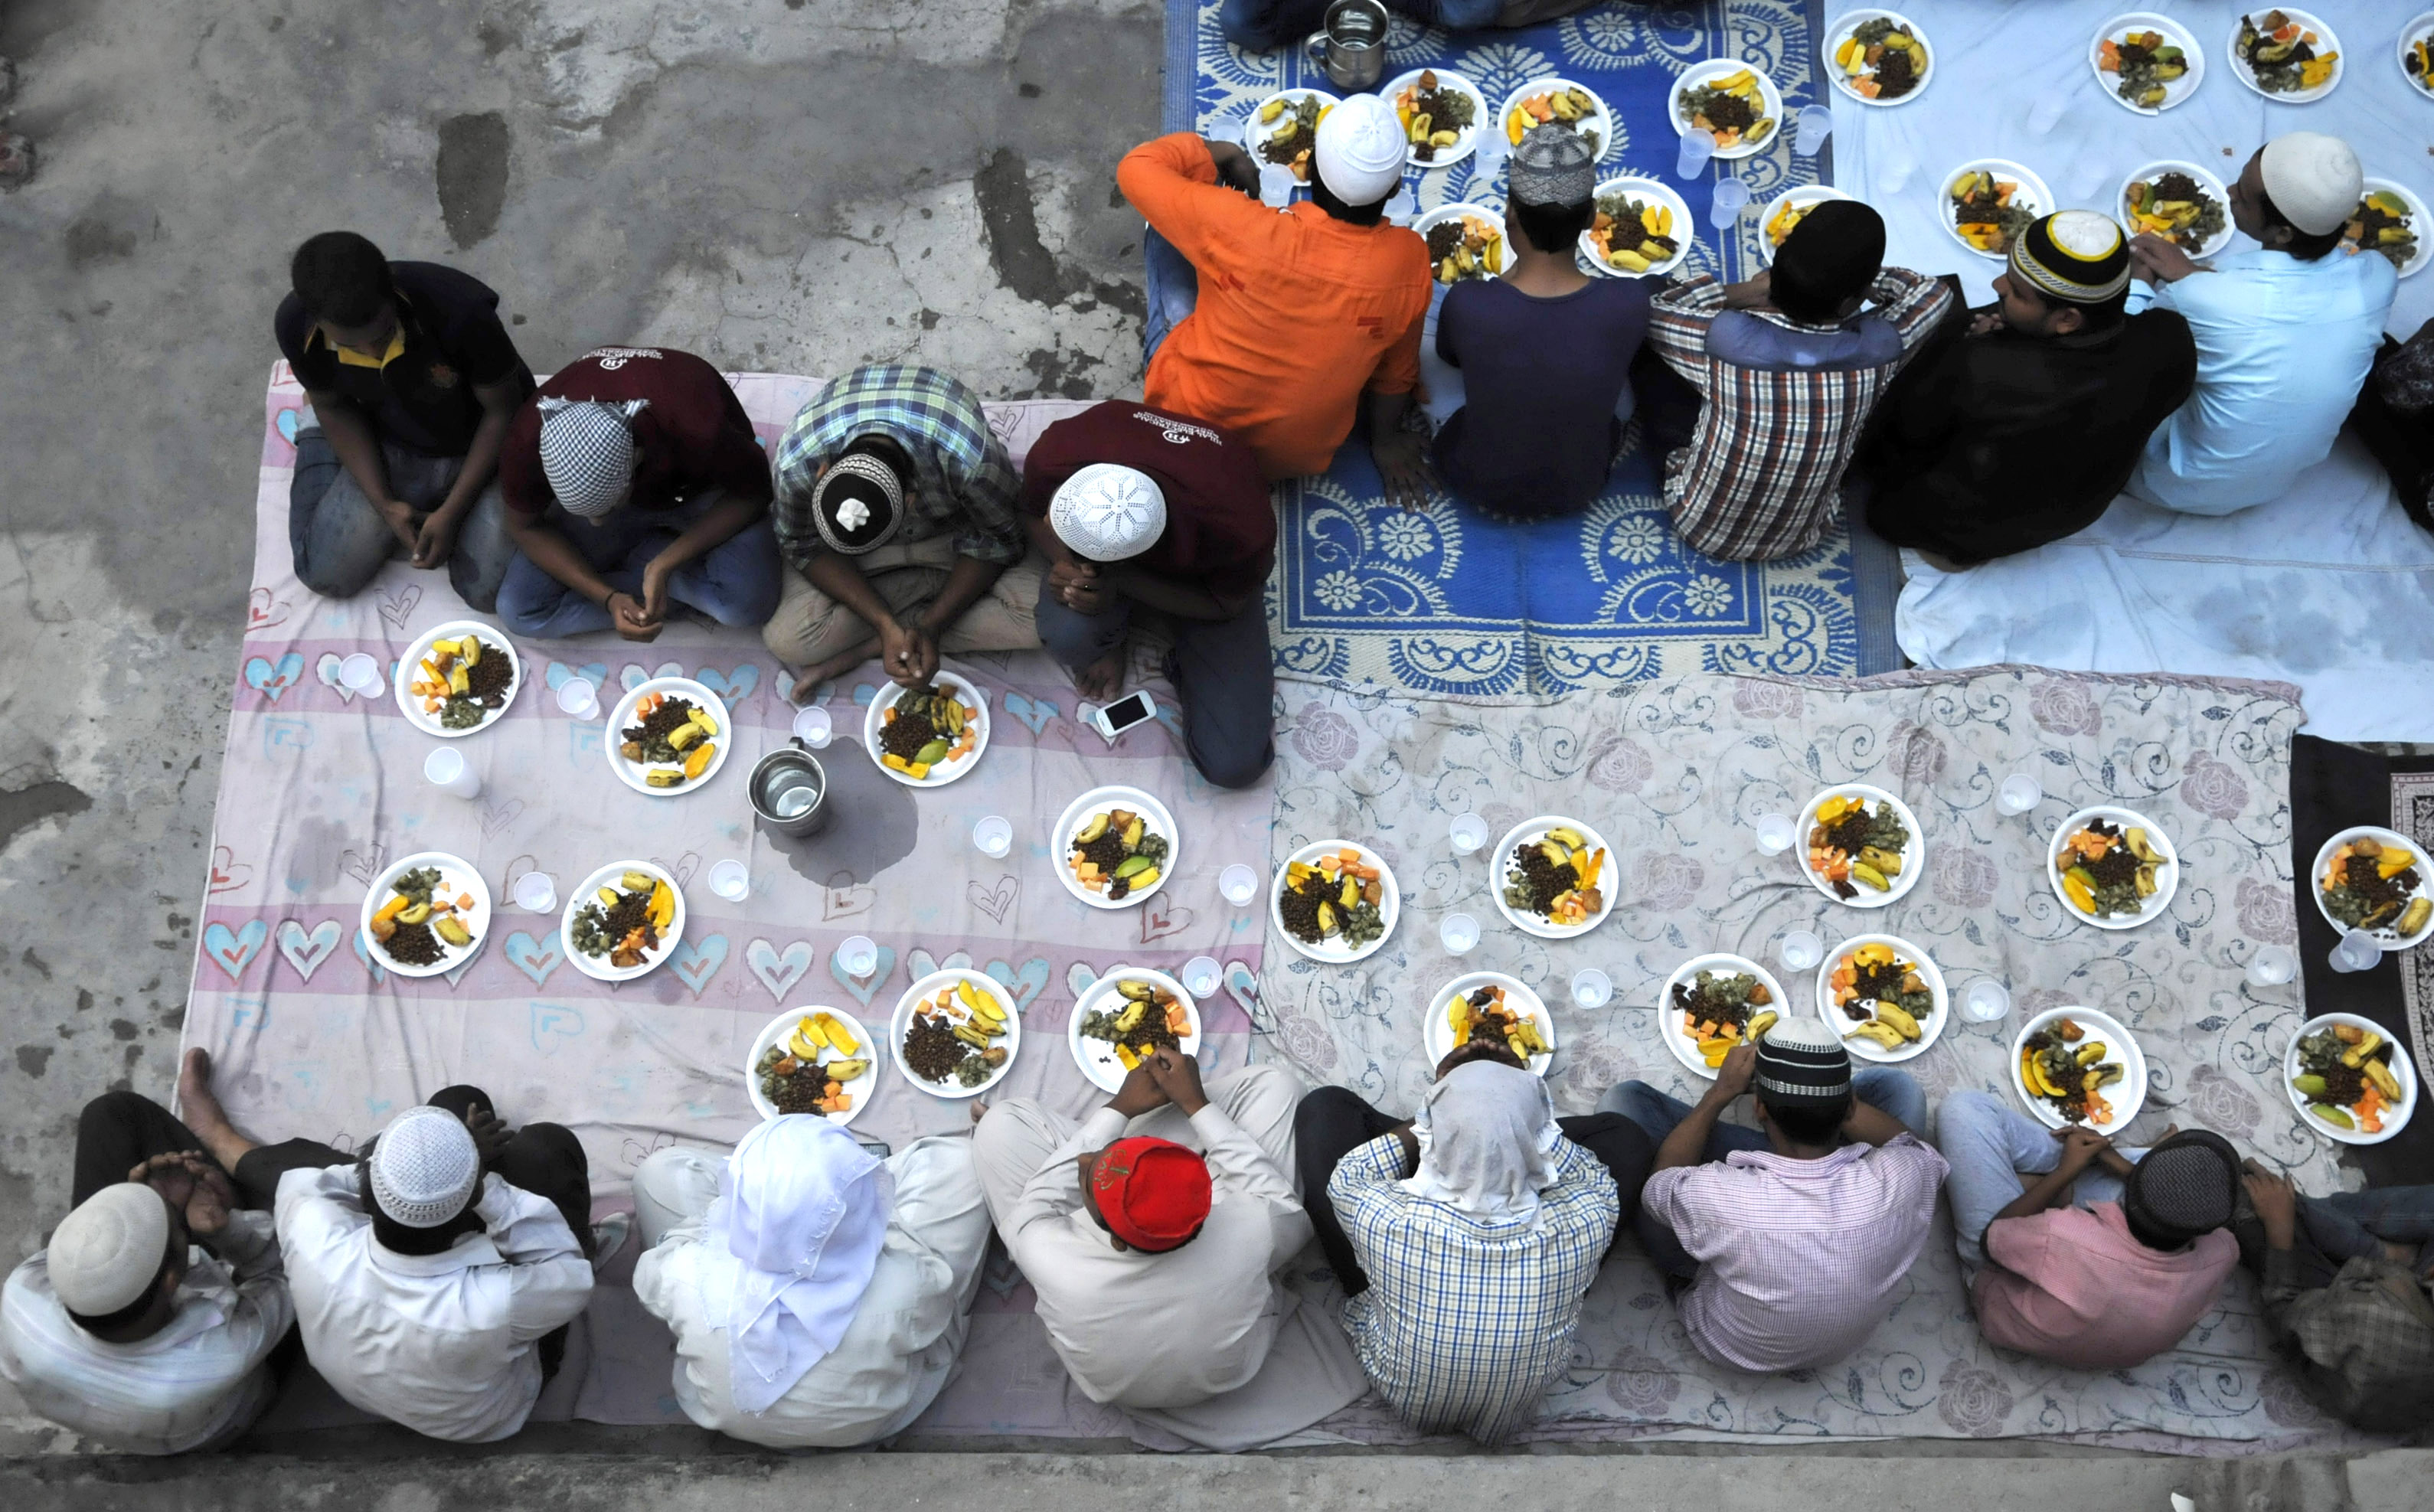 Muslims offer prayers before breaking their Roza fast with Iftar meal during the ongoing month of Ramzan on June 28, 2016 in Noida, India. (Sunil Ghosh—Hindustan Times/Getty Images)